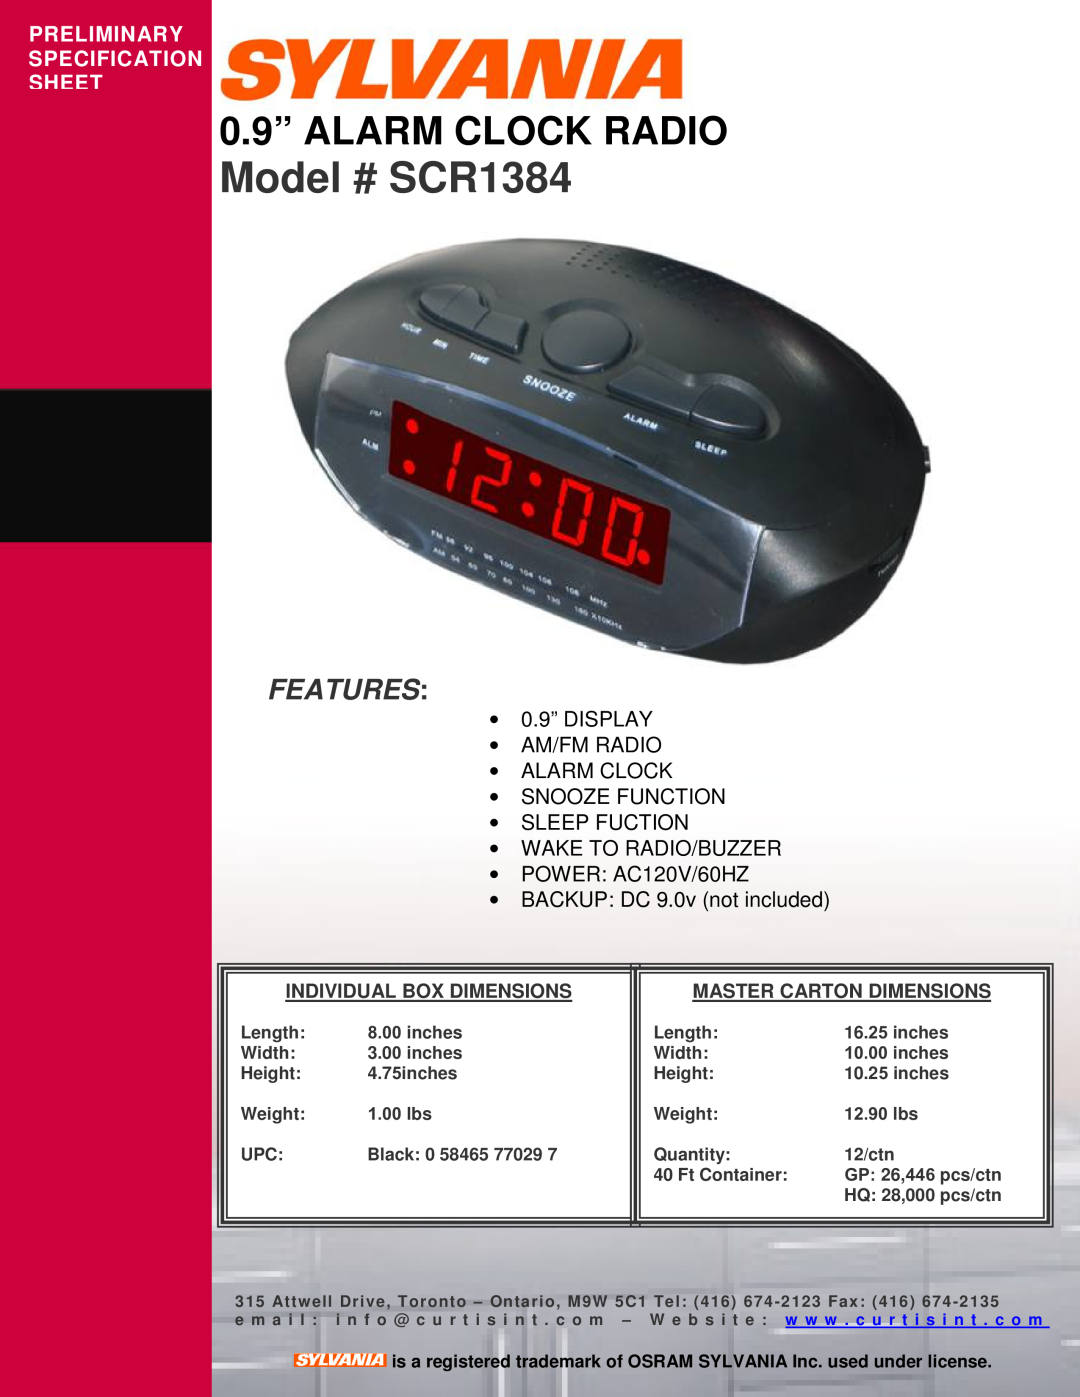 Curtis specifications Model # SCR1384, 0.9” ALARM CLOCK RADIO, Features, Preliminary Specification Sheet 